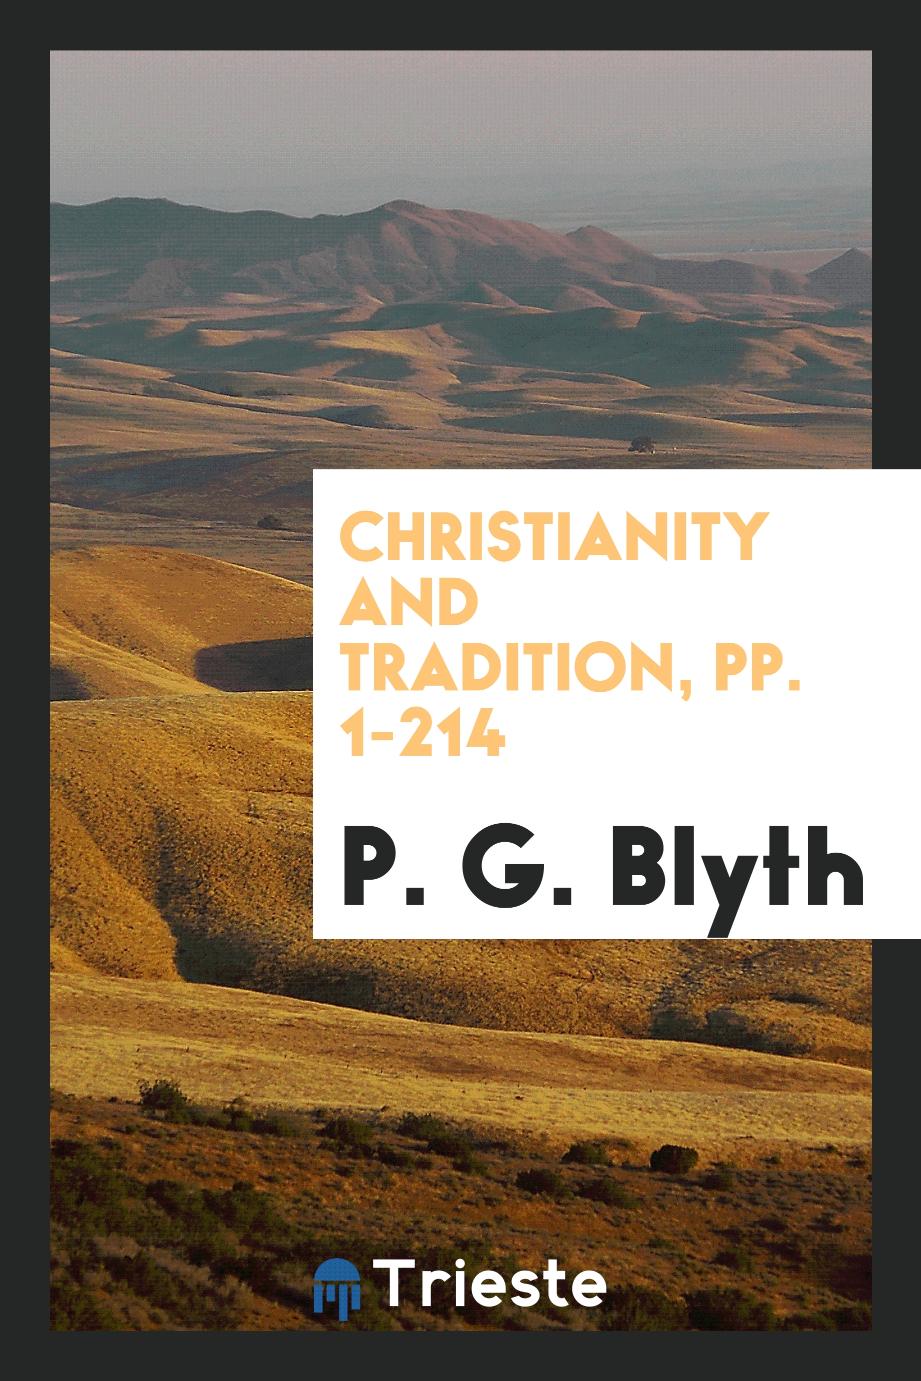 Christianity and Tradition, pp. 1-214